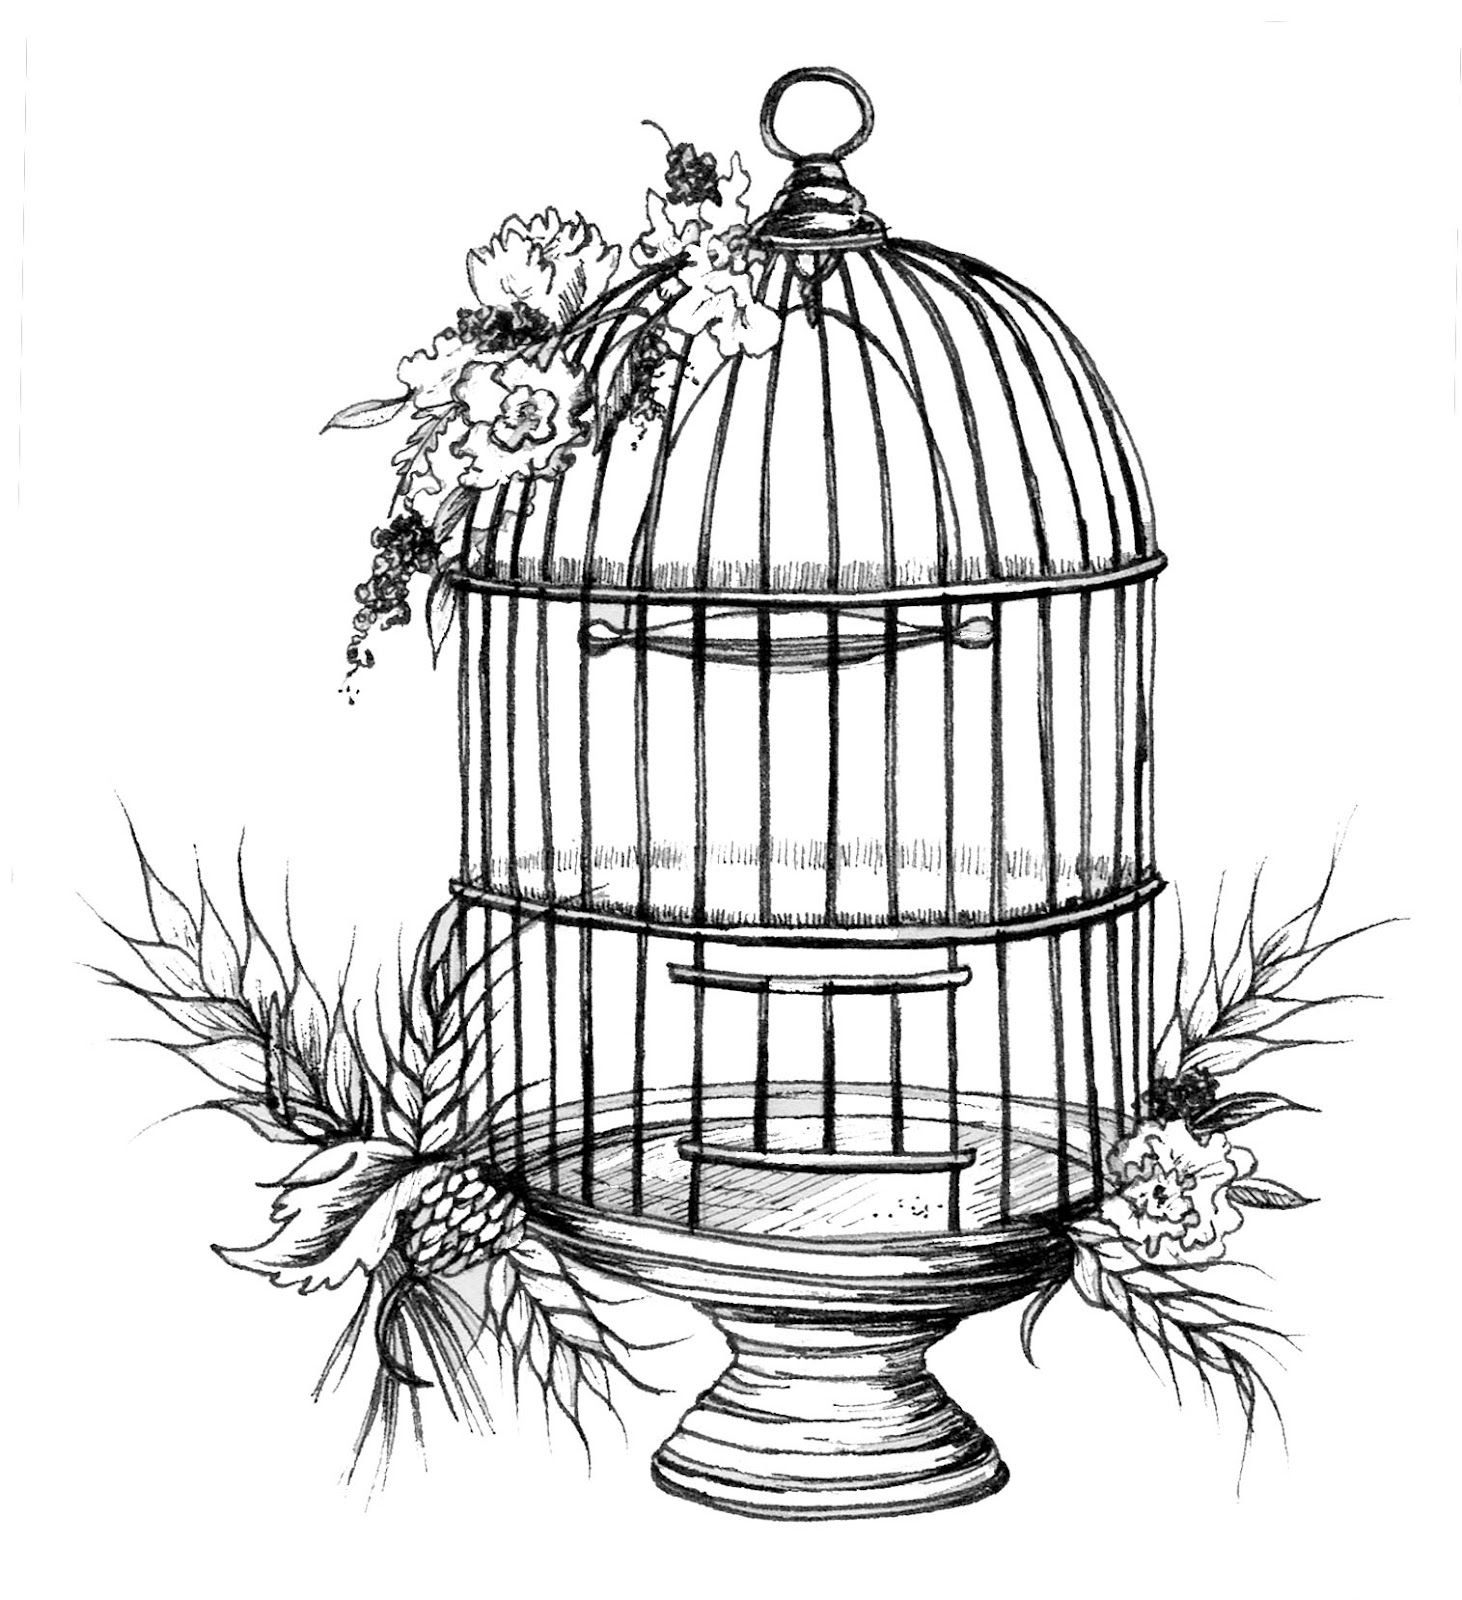 Bird Cage Sketch | Birds and their homes | Pinterest | Bird cages ...